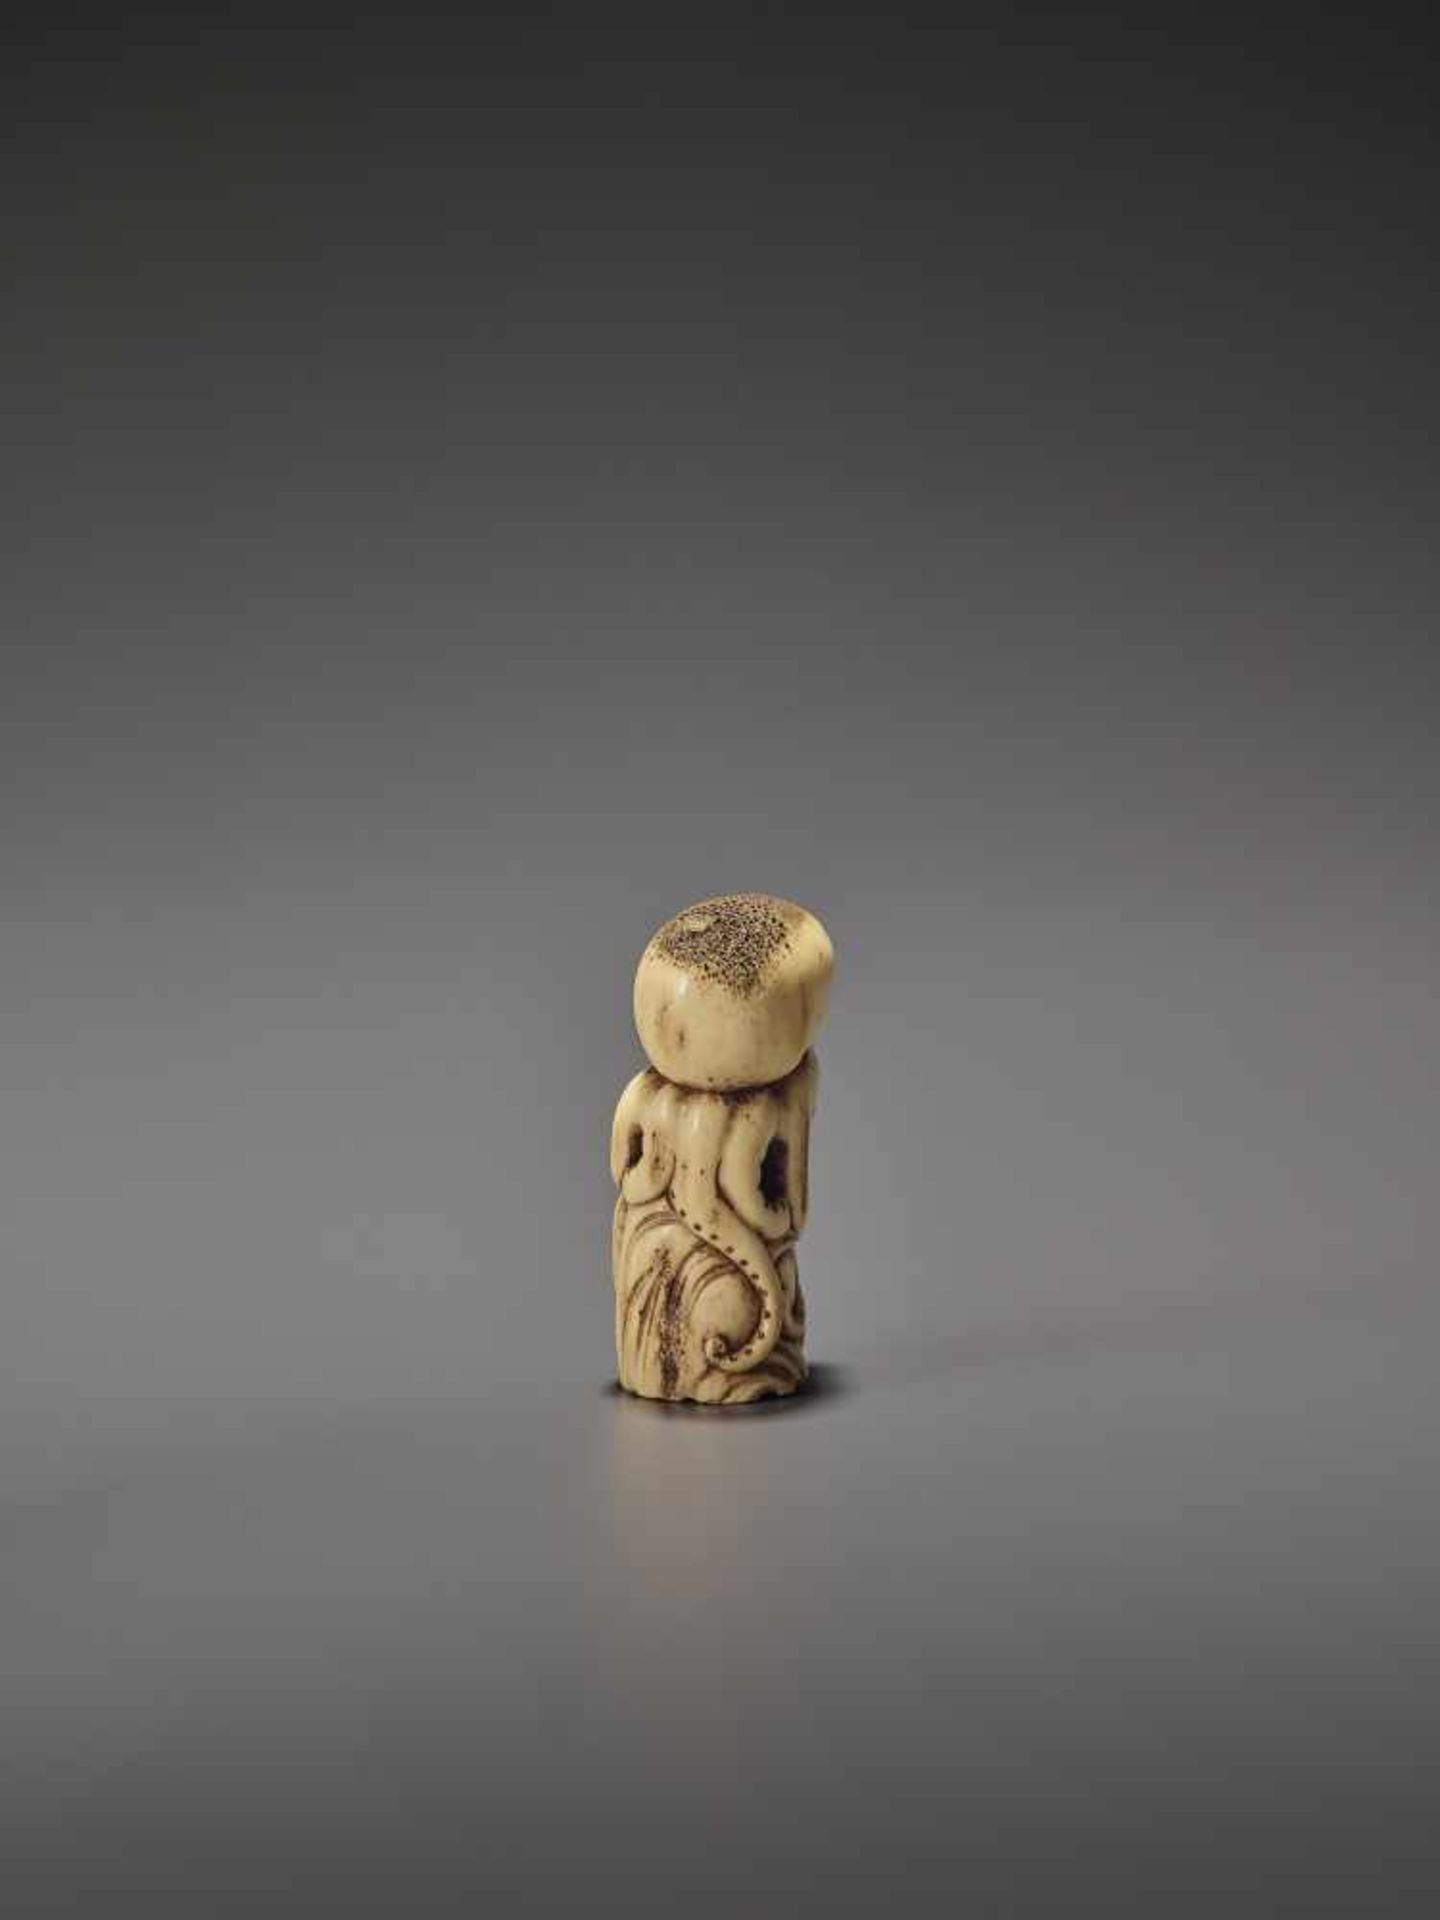 A RARE STAG ANTLER NETSUKE OF AN OCTOPUS UnsignedJapan, early 19th century, Edo period (1615-1868) - Image 7 of 10